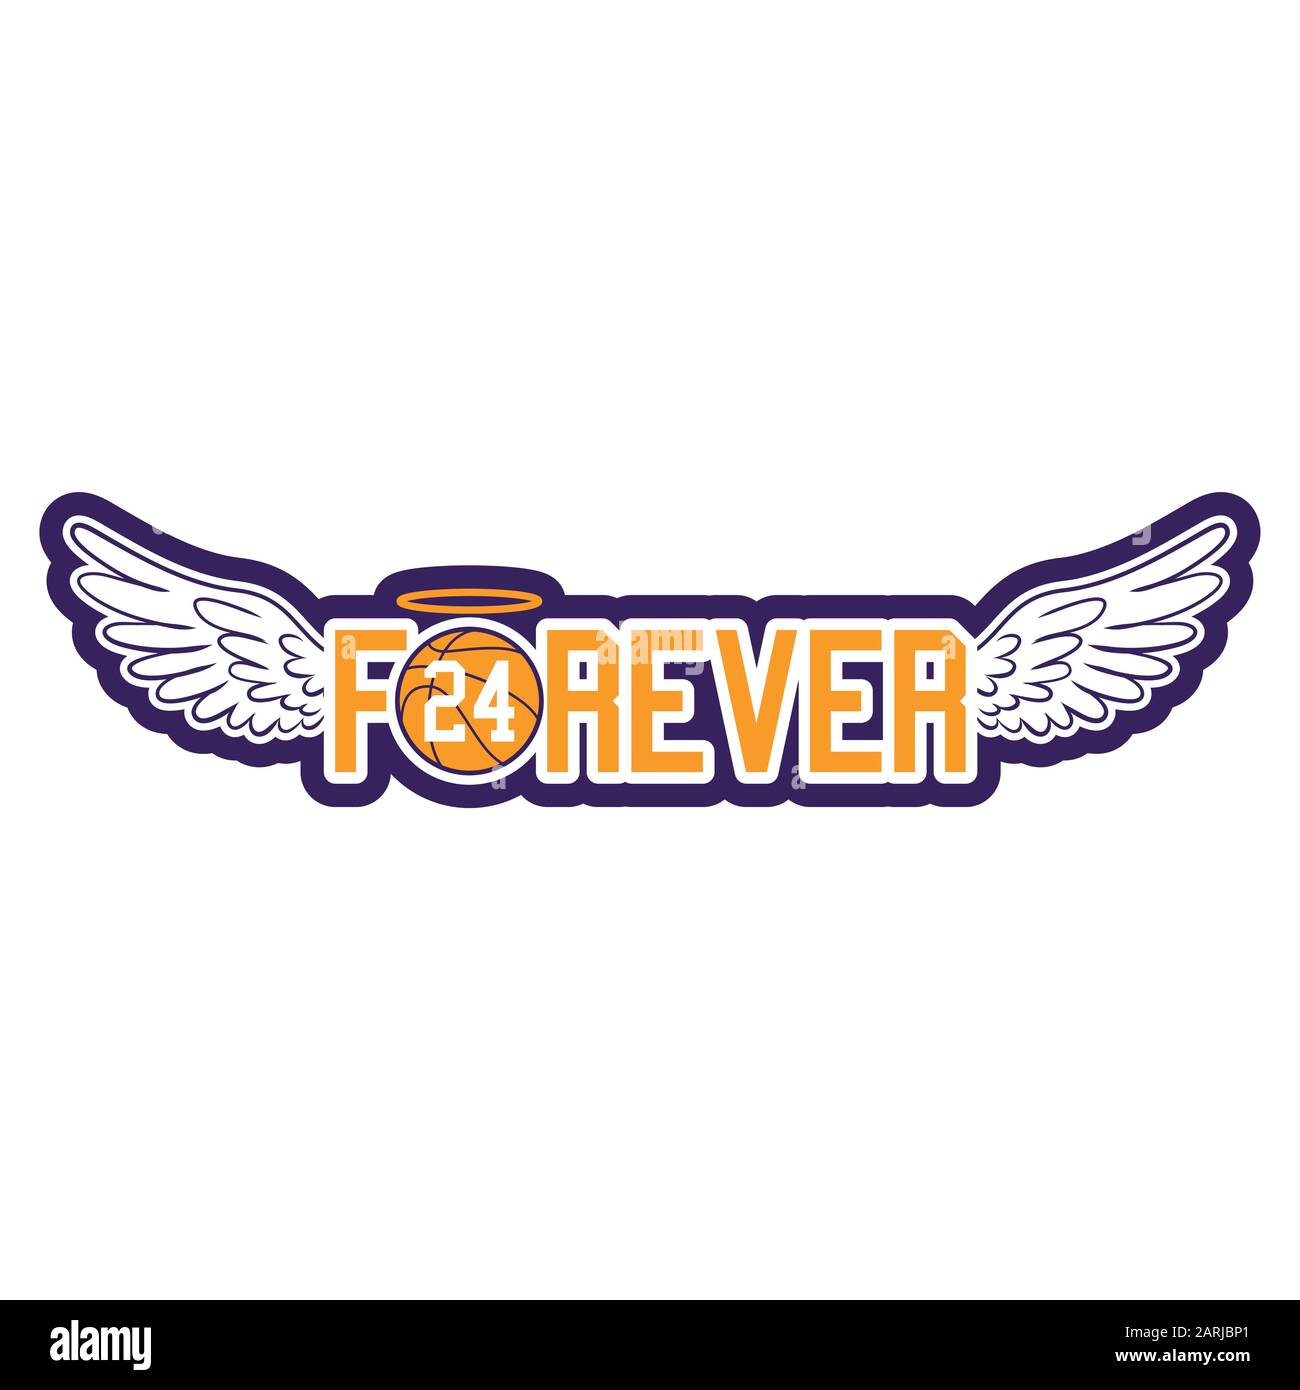 R.I.P. Kobe Bryant - Basketball with angel wings and glory. NBA legend, The world is in shock as news of Kobe Bryant’s death spread 2020 january 26th. Stock Vector